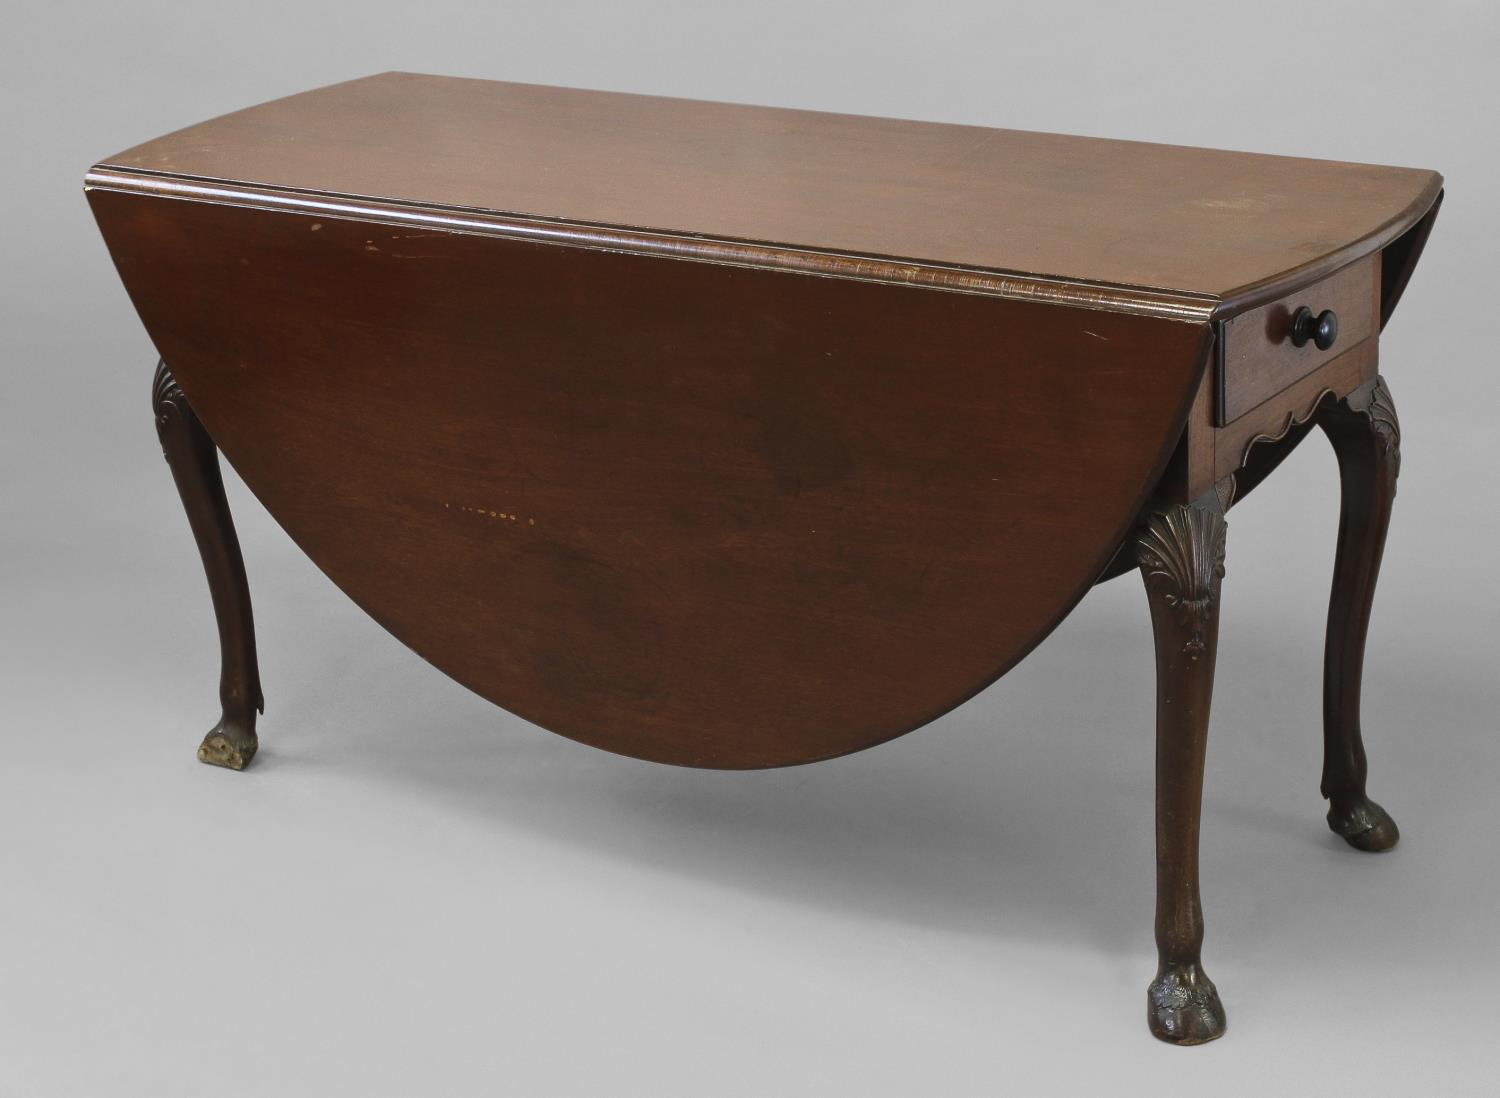 A GEORGE II IRISH MAHOGANY GATELEG DINING TABLE, the broad oval top above twin frieze drawers, on